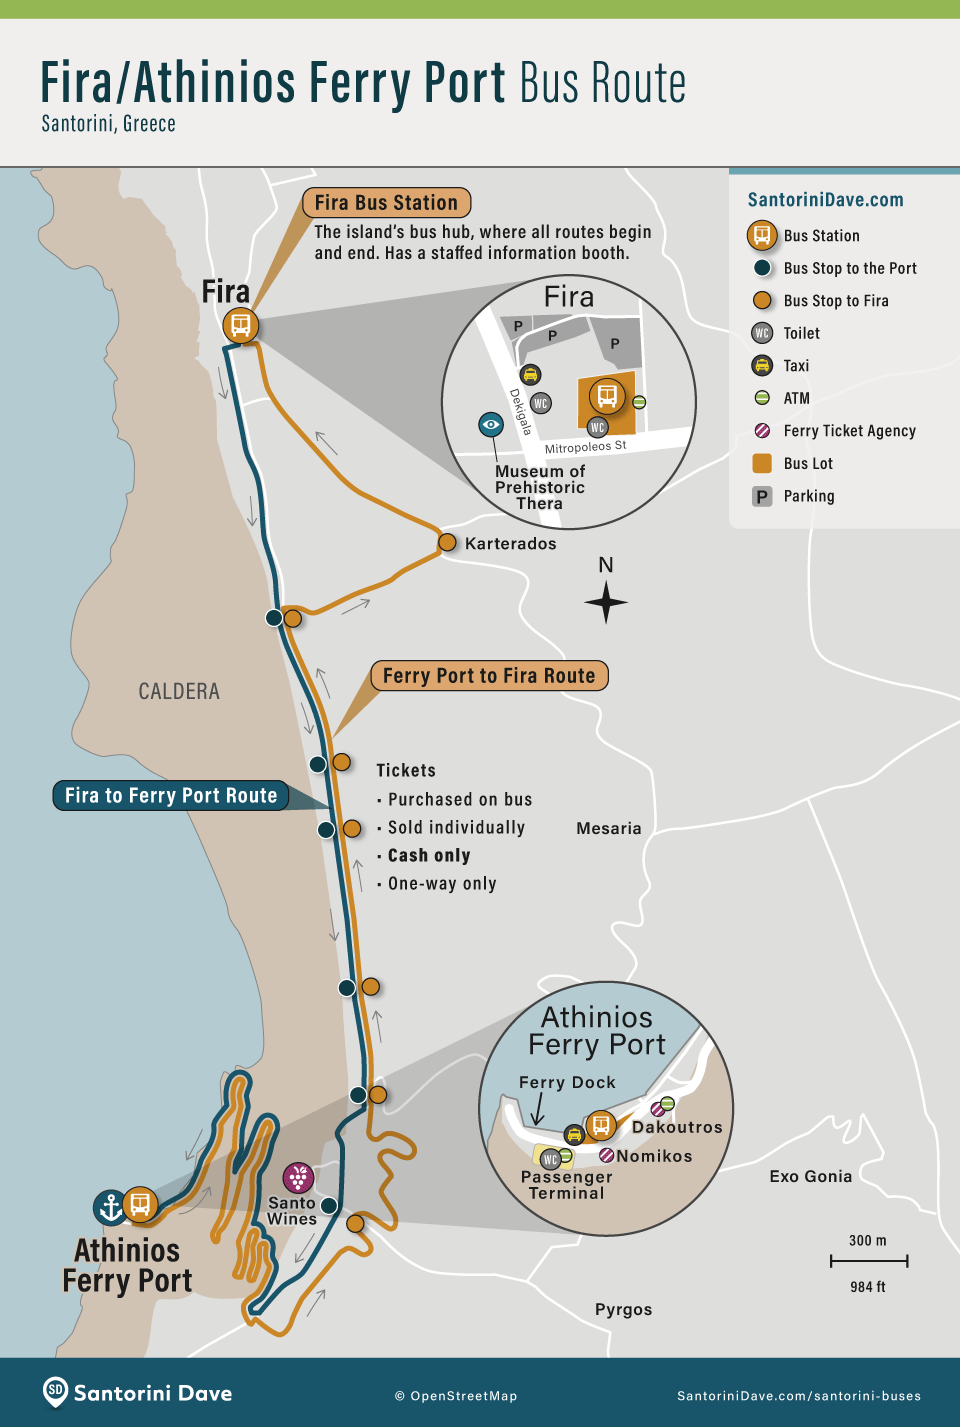 Map of the Fira to Athinios Ferry Port bus route